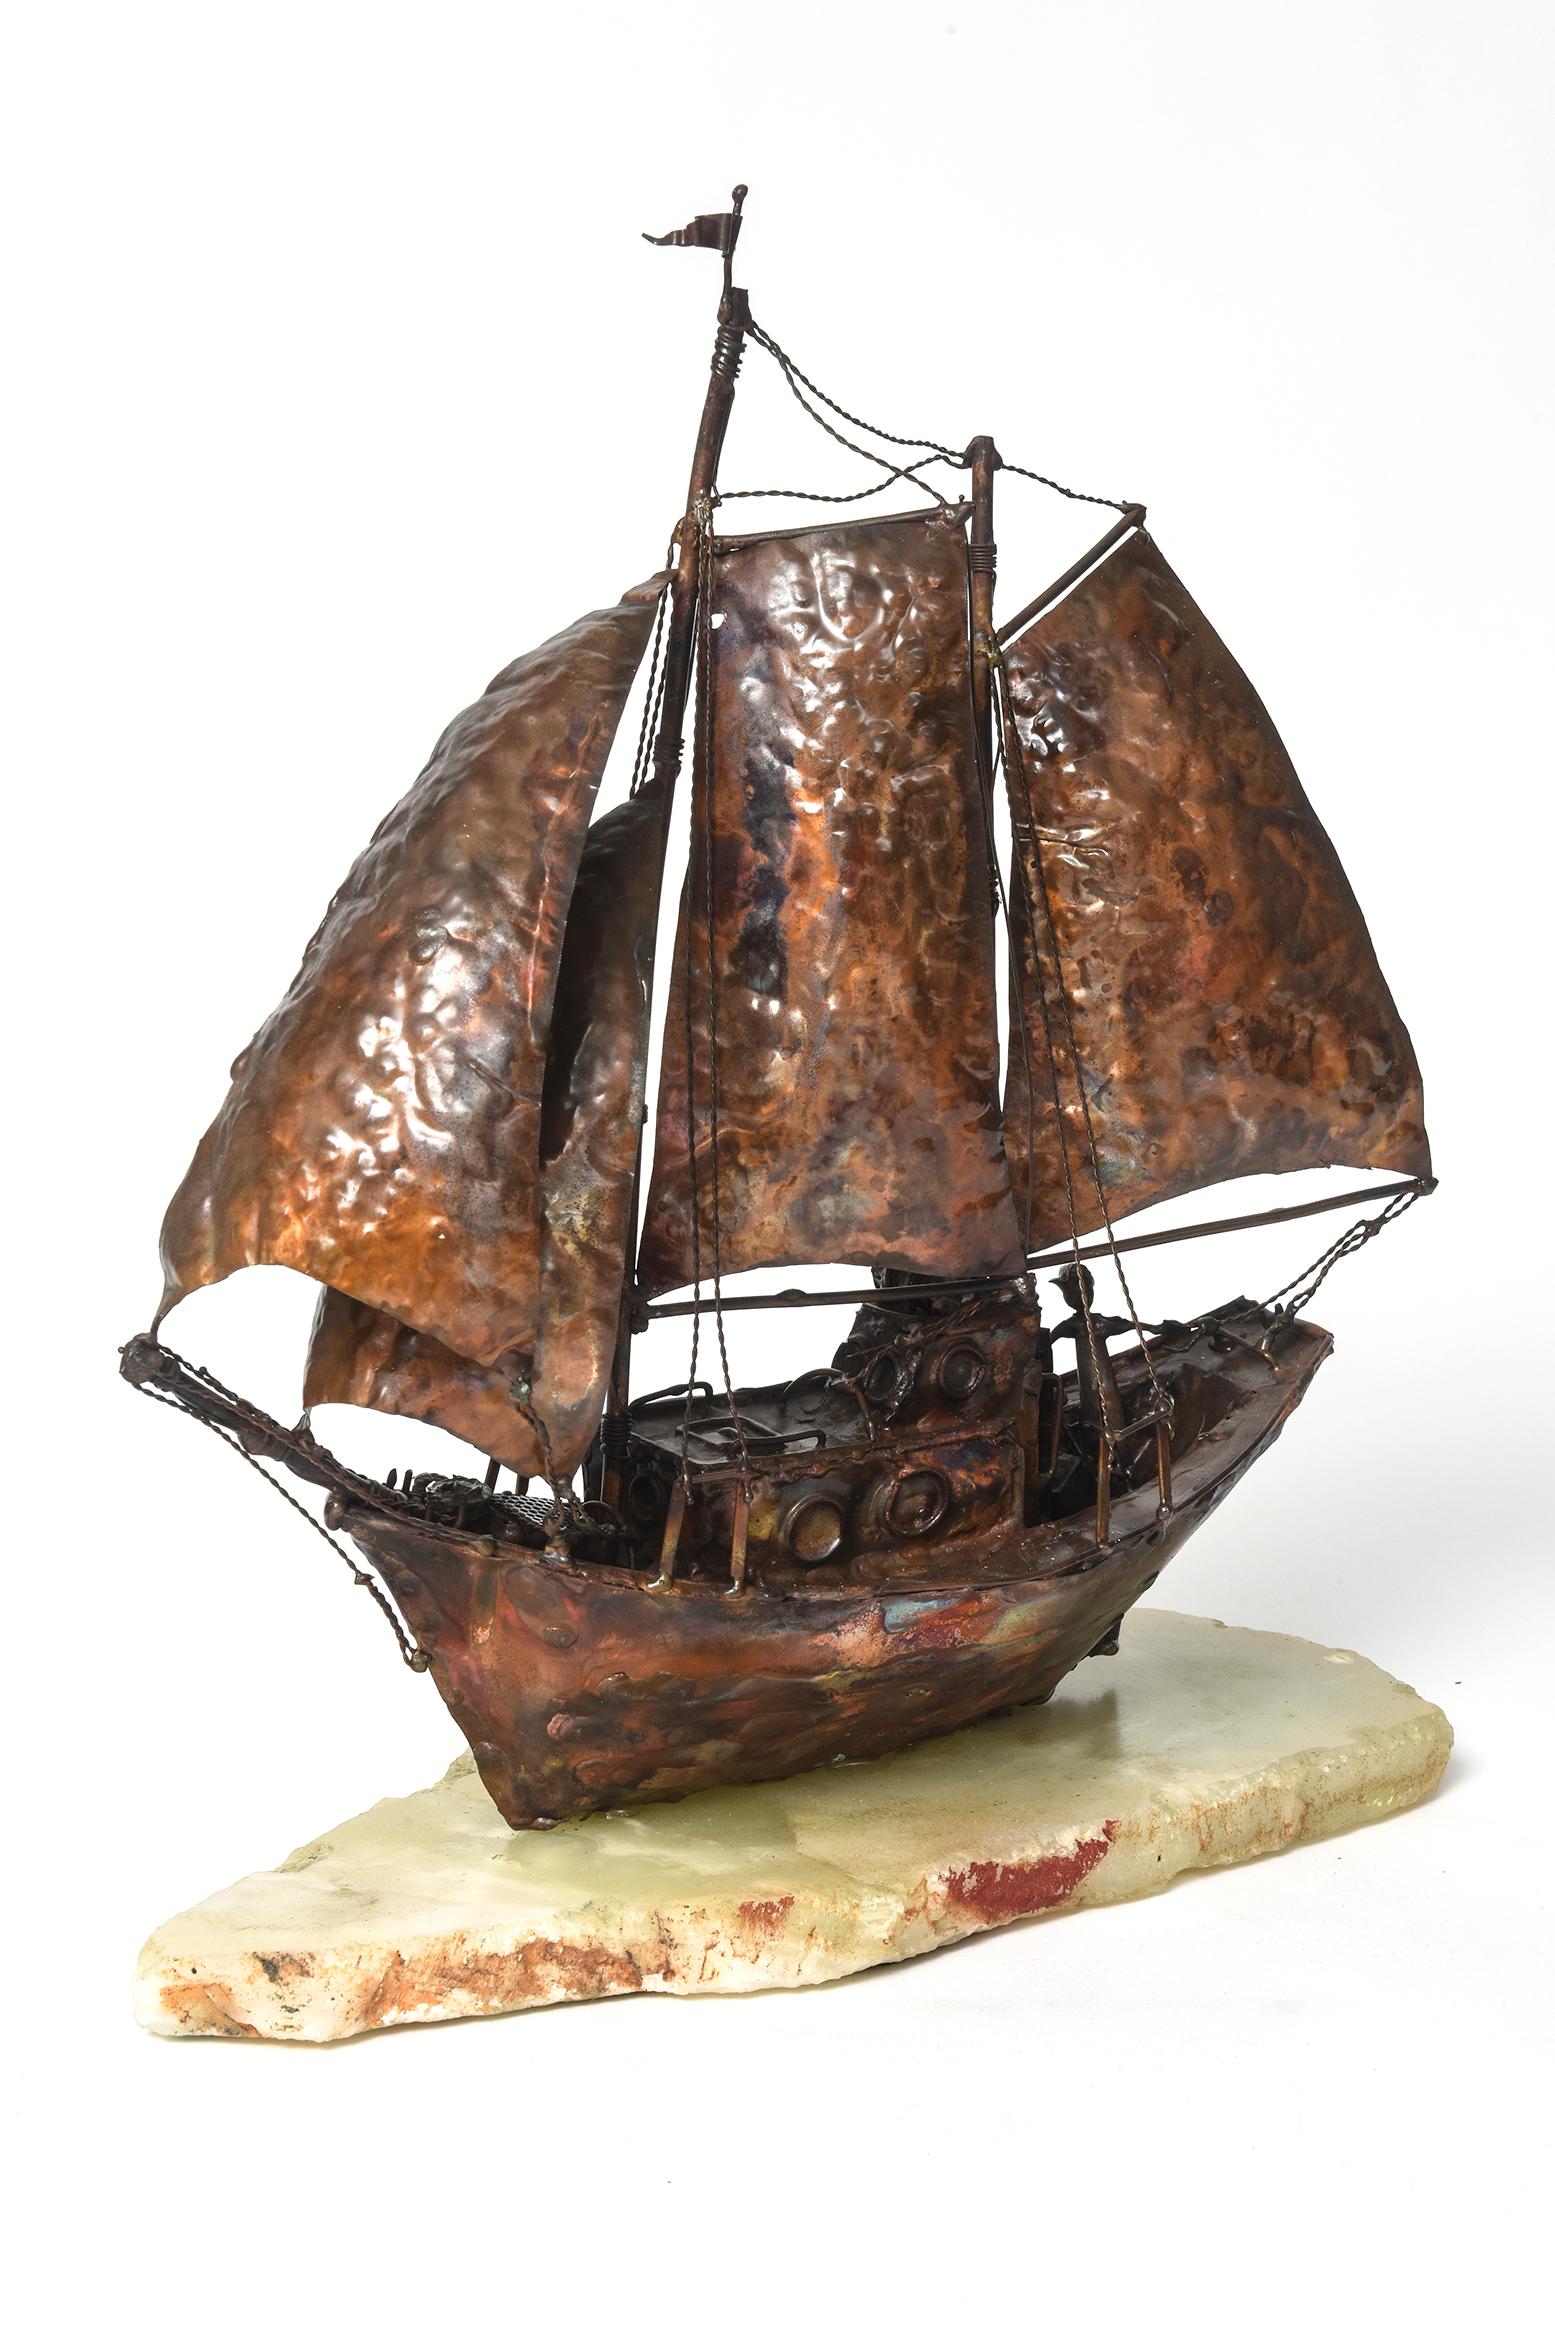 Wonderful nautical sculpture by artist Jim Lewk featuring a beautiful copper sailboat sailing with sails full of wind and captain at the wheel.

Signed J. Lewk 1975 on the marble base.

Jim Lewk Sculptor Biography:
Biography Born in Troyes, France